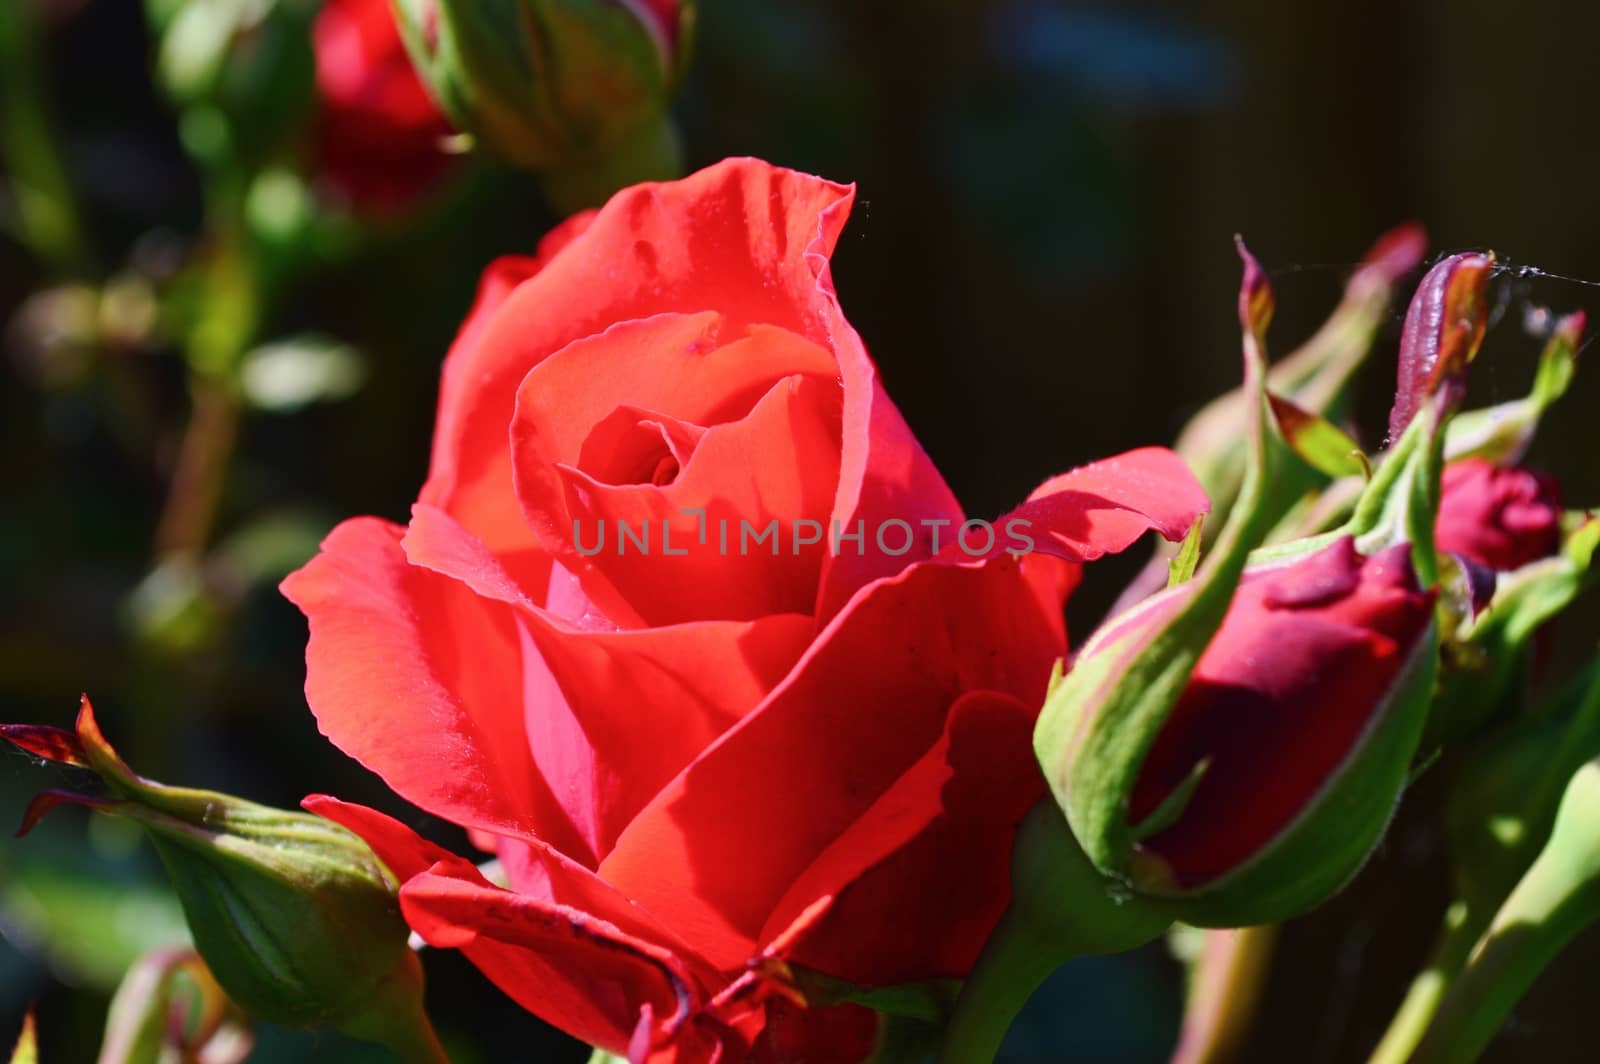 Close-up image of a beautiful red rose bloom.